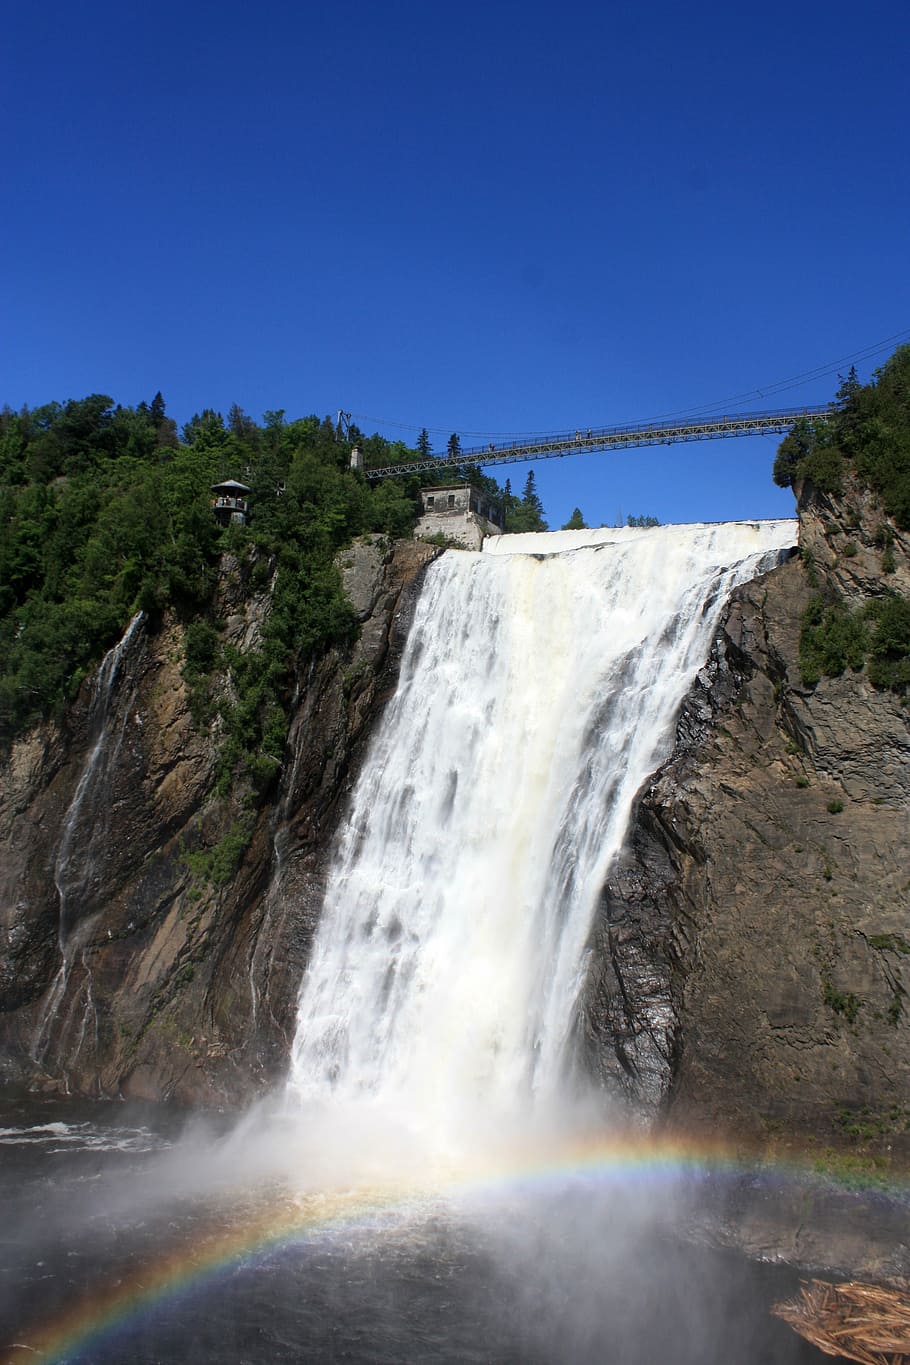 waterfalls during daytime, waterfall, montomorency if, montomorency, quebec, canada, rainbow, water, scenics - nature, motion